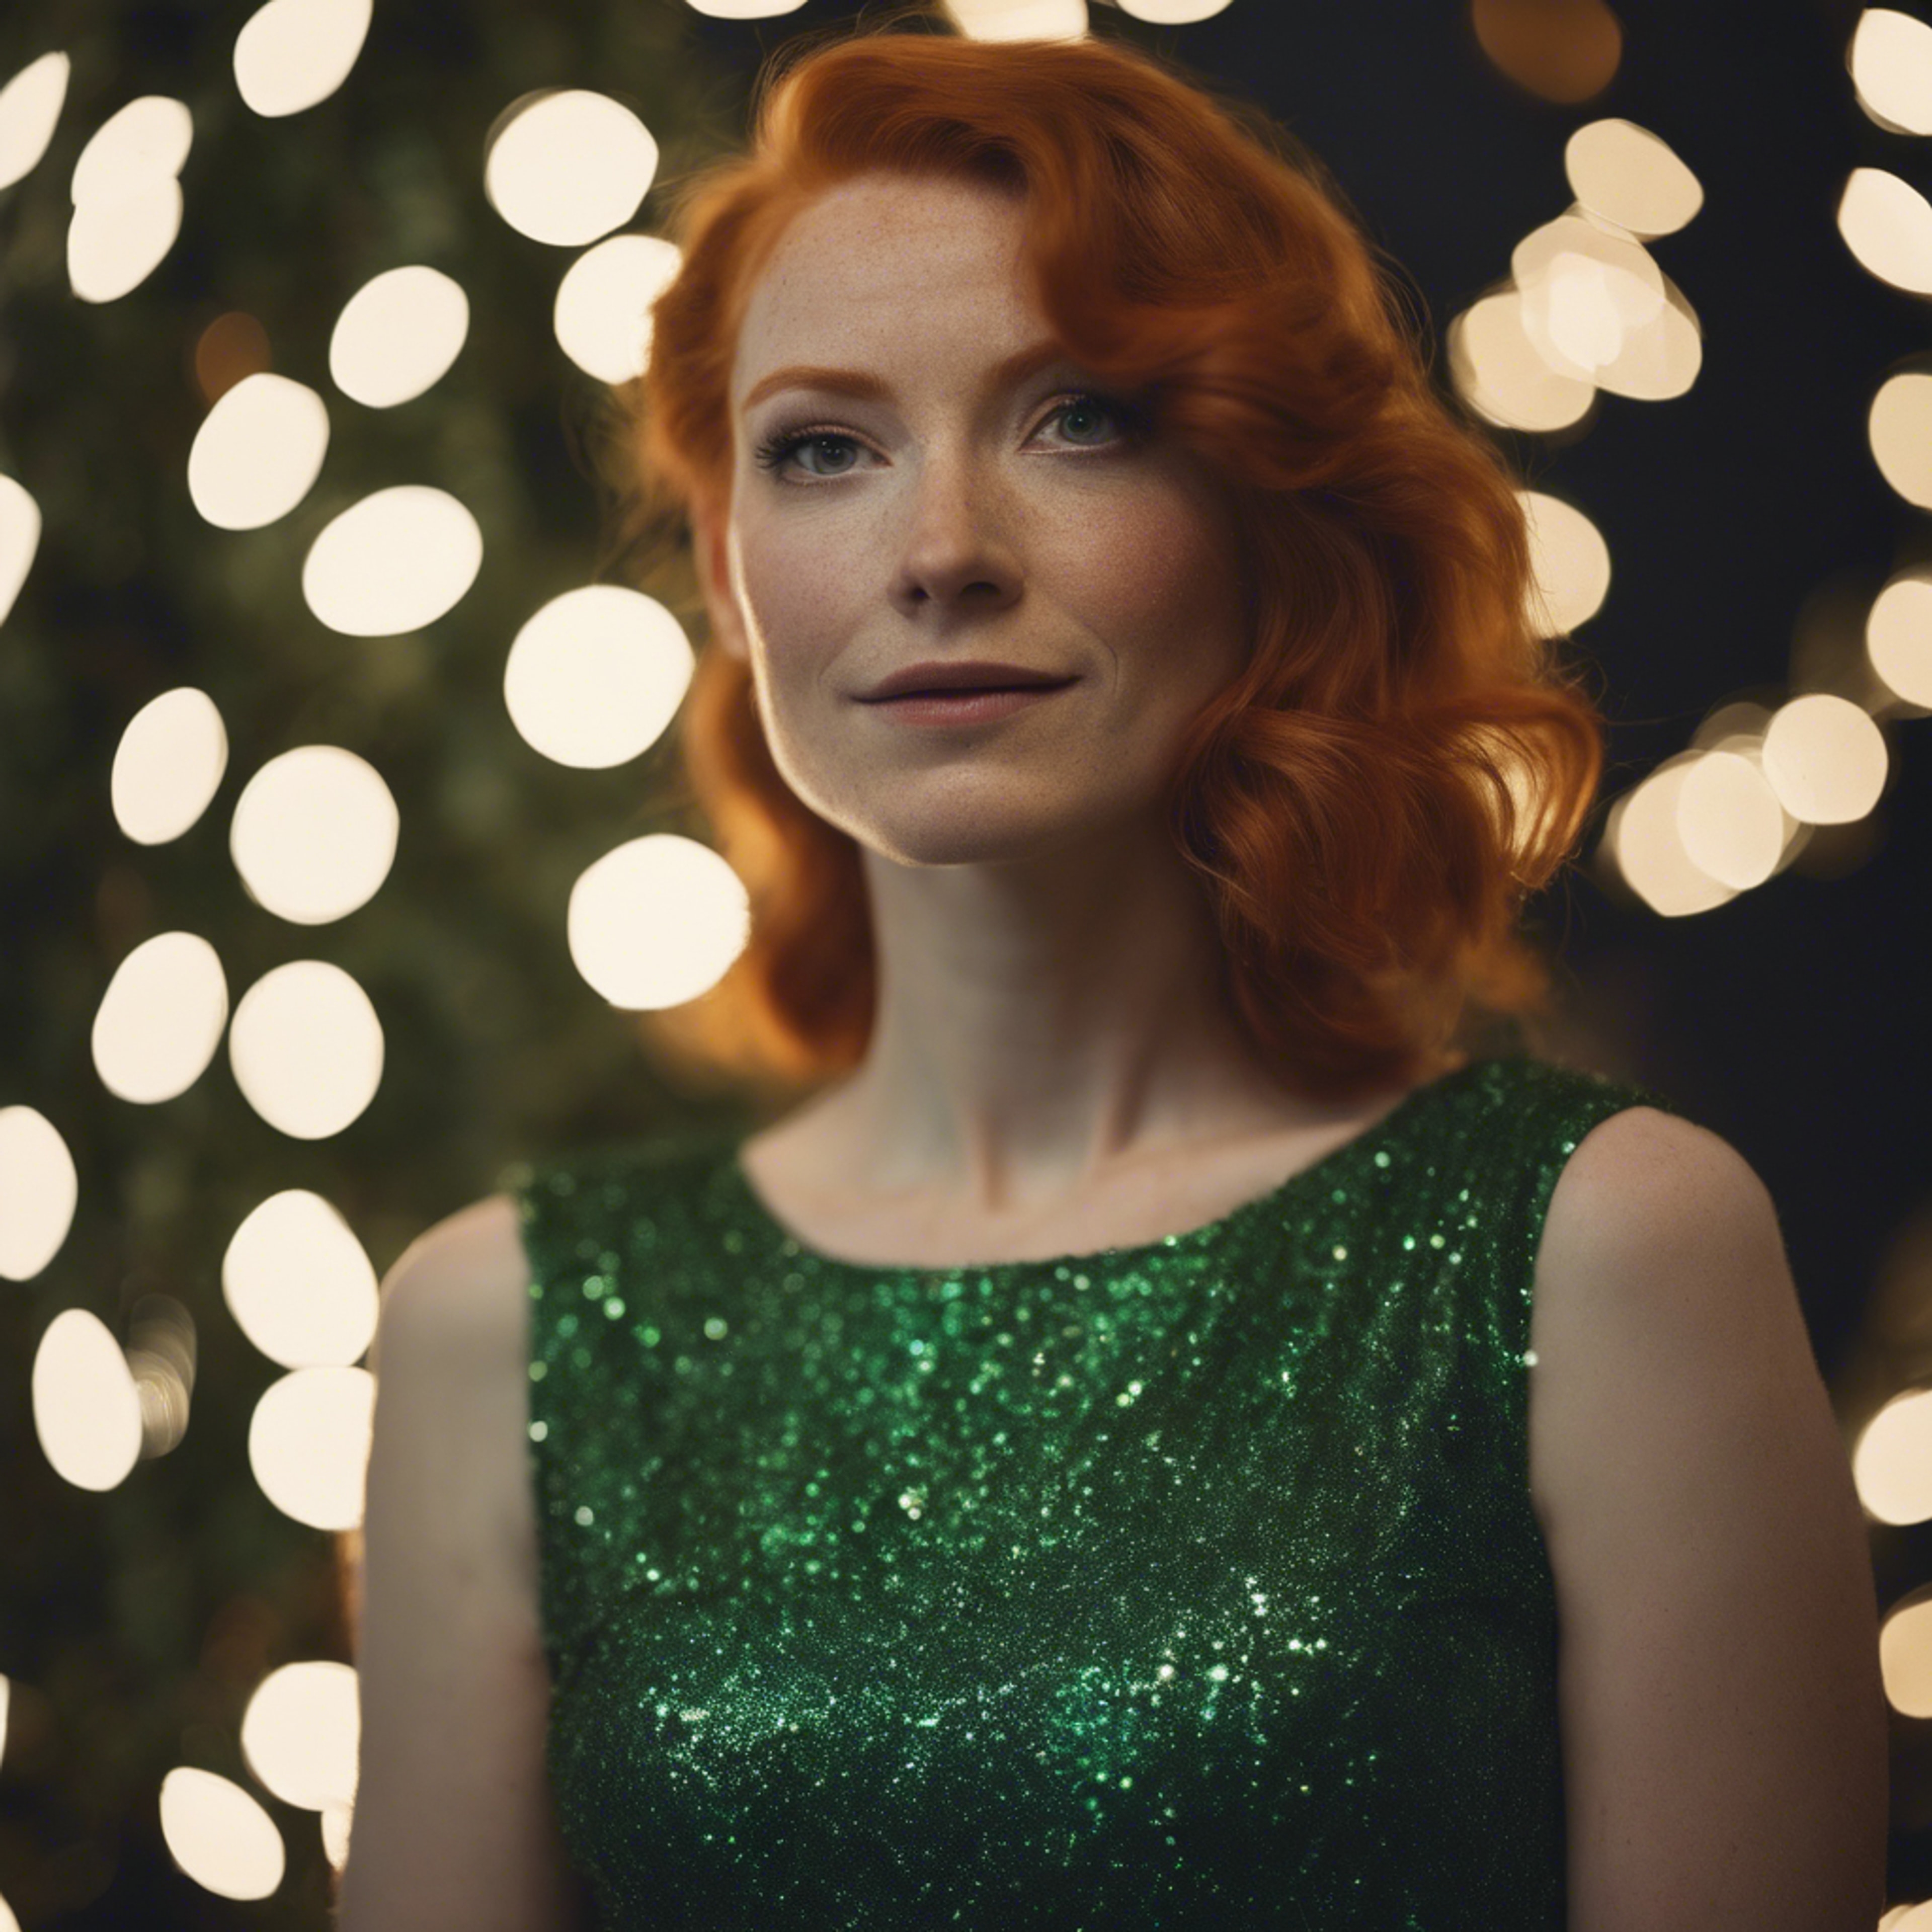 A redheaded woman wearing a sparkly green dress at a Christmas party Wallpaper[a7aea6b7222f4d2facc9]